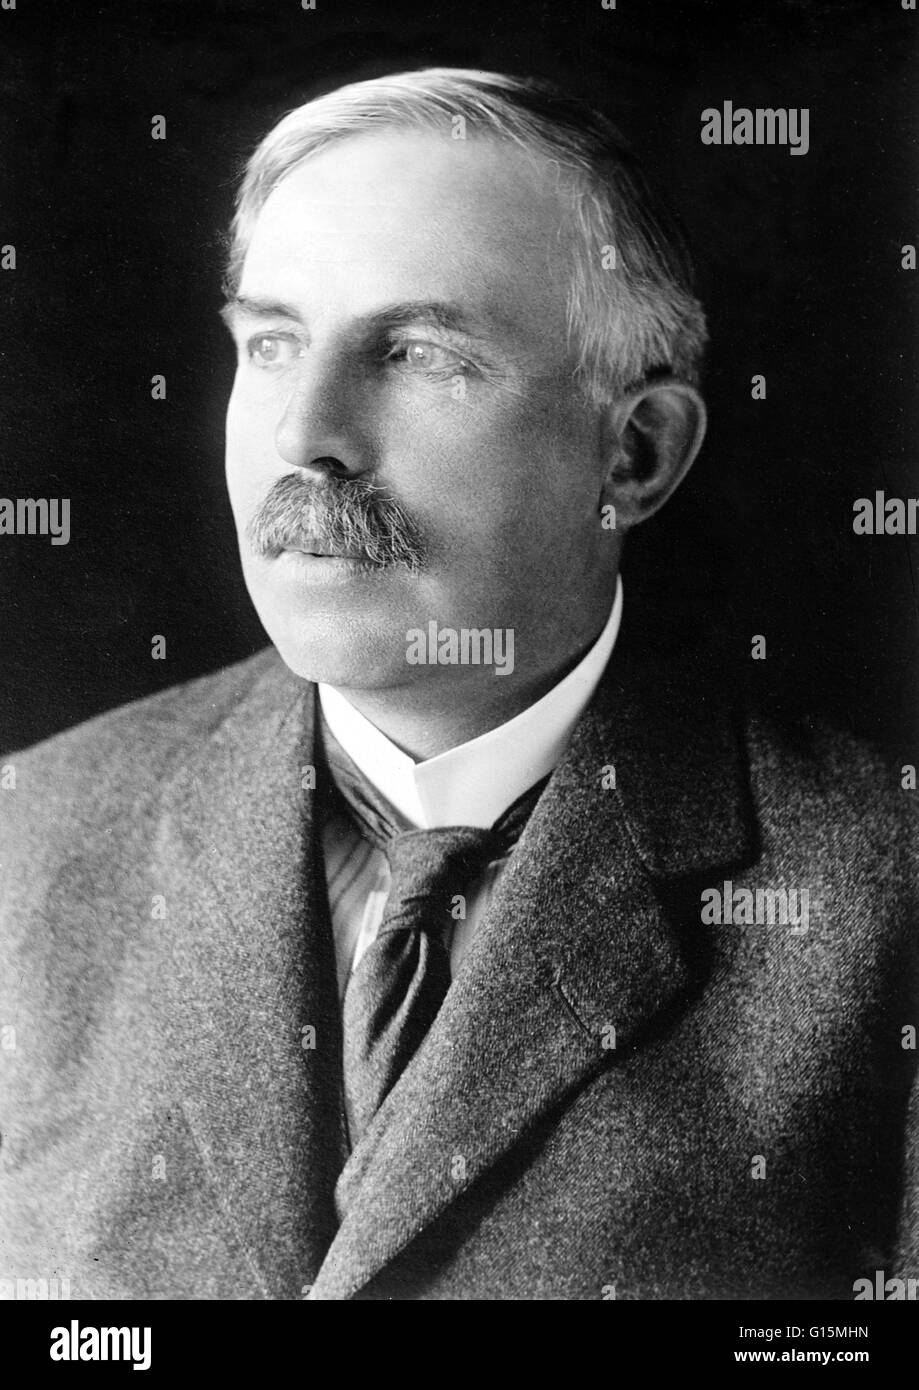 Ernest Rutherford (August 30, 1871 - October 19, 1937) was a New Zealand-born British chemist and physicist who became known as the father of nuclear physics. He discovered the concept of radioactive half-life, proved that radioactivity involved the trans Stock Photo